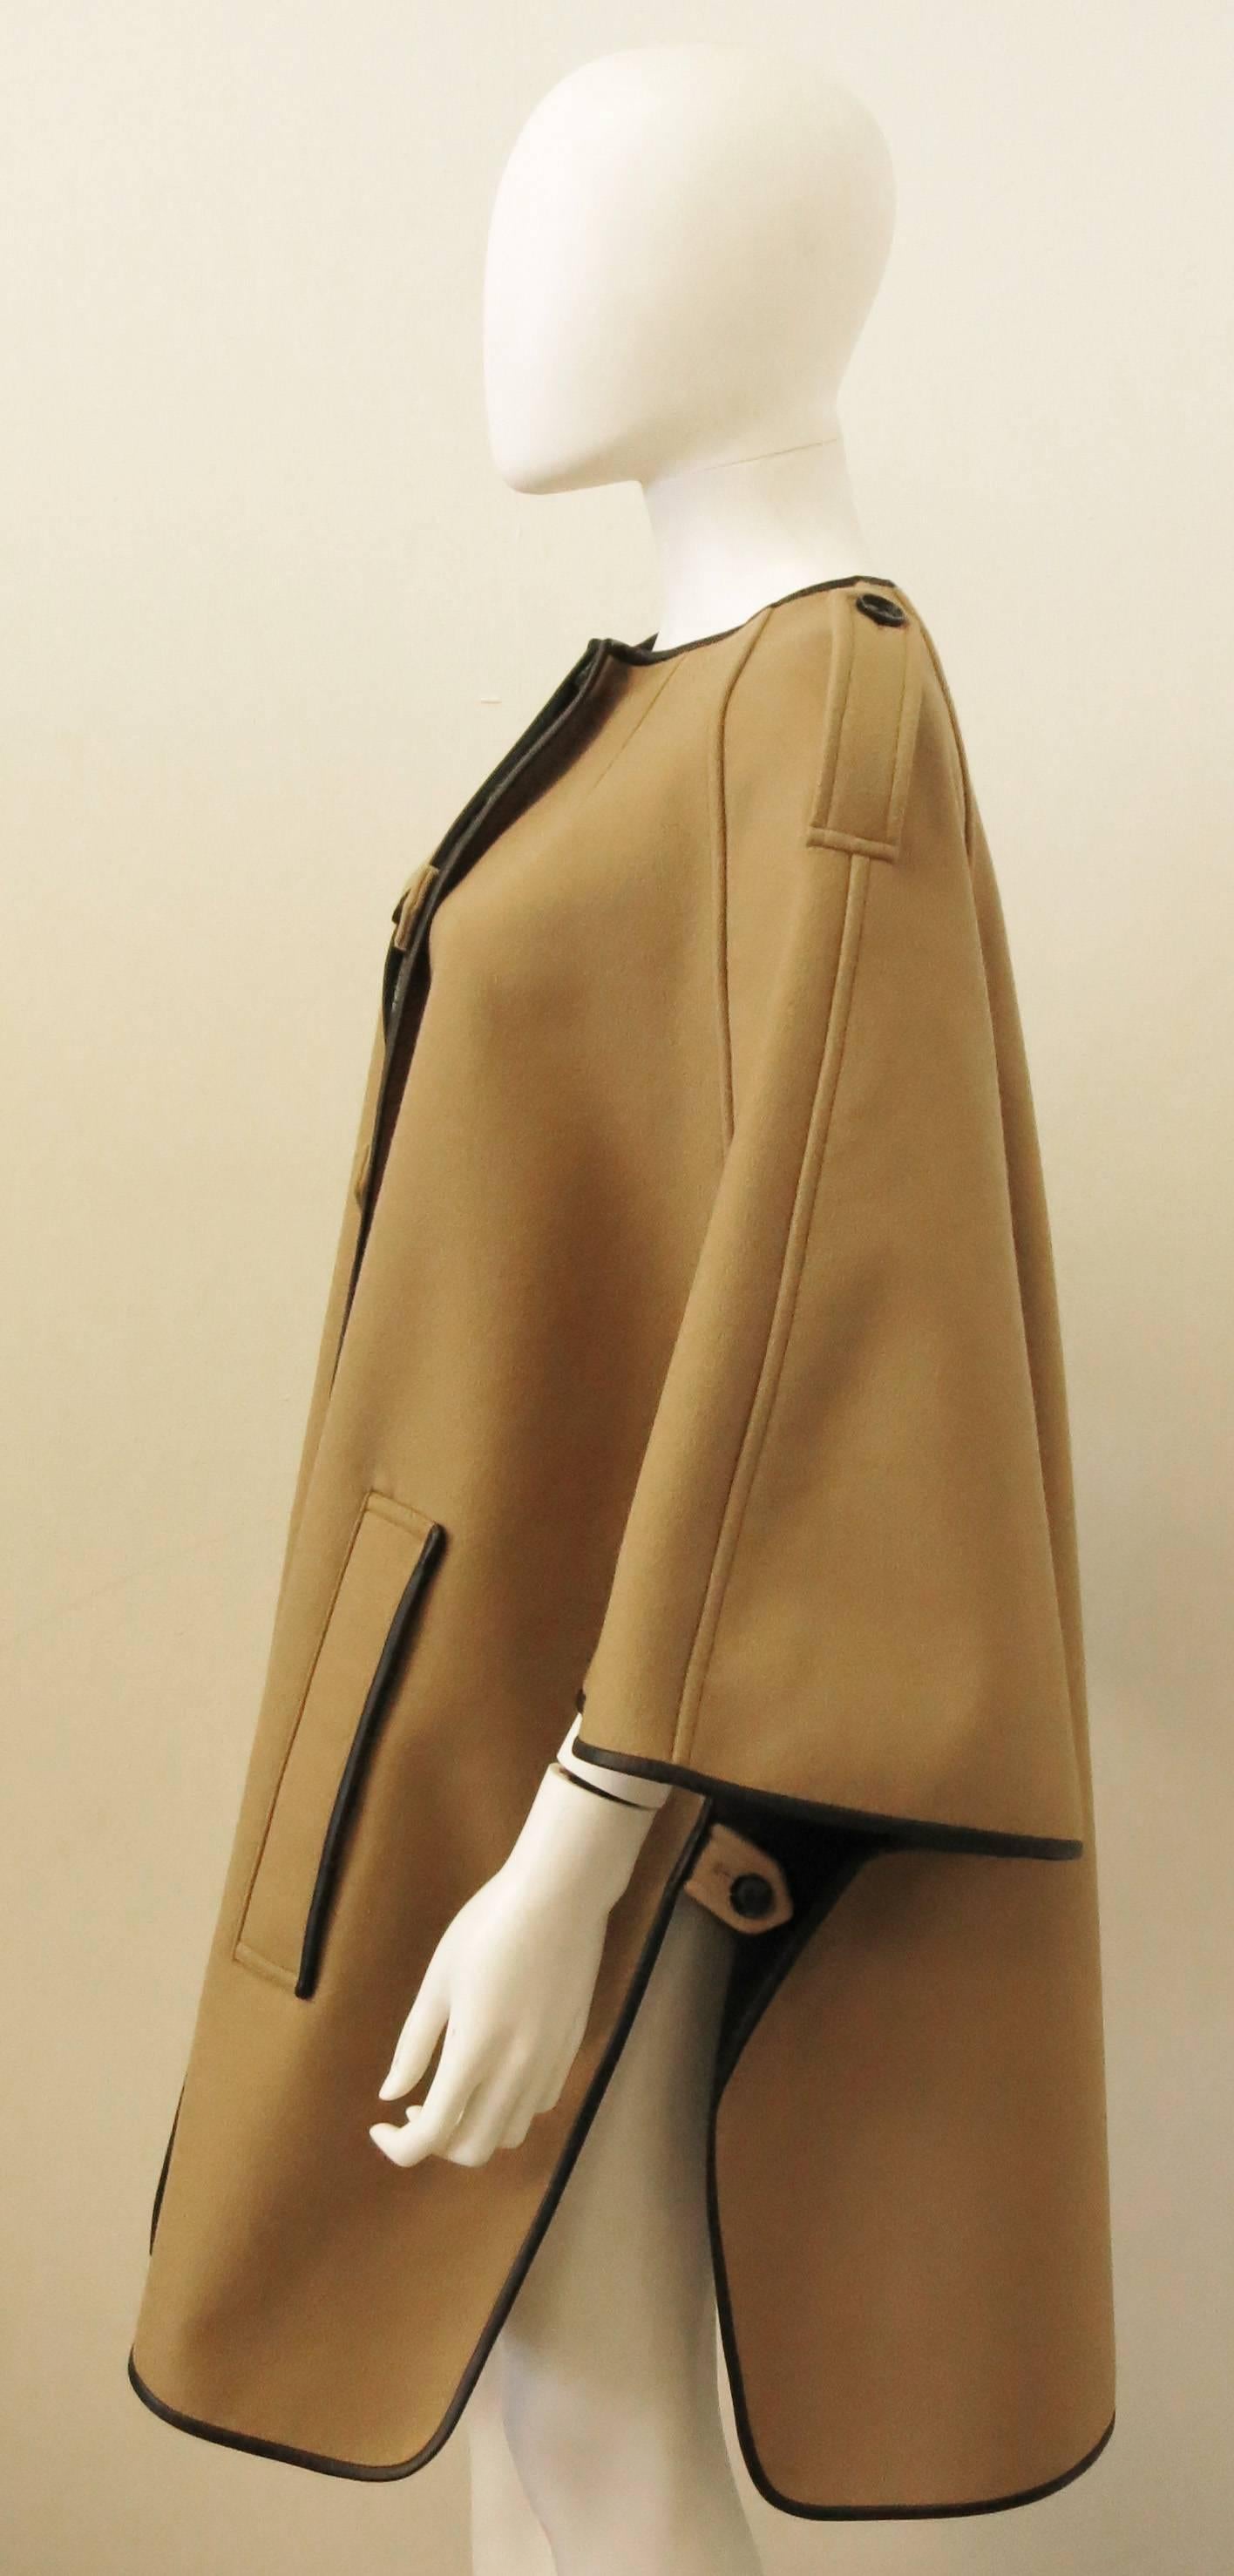 A Burberry camel coloured cape coat made from a wool blend fabric with a dark brown leather trim.
The cape has soft rounded shoulders, seam detailing, epaulettes and a button fastening at the front. It also has two pockets and buttons at the side